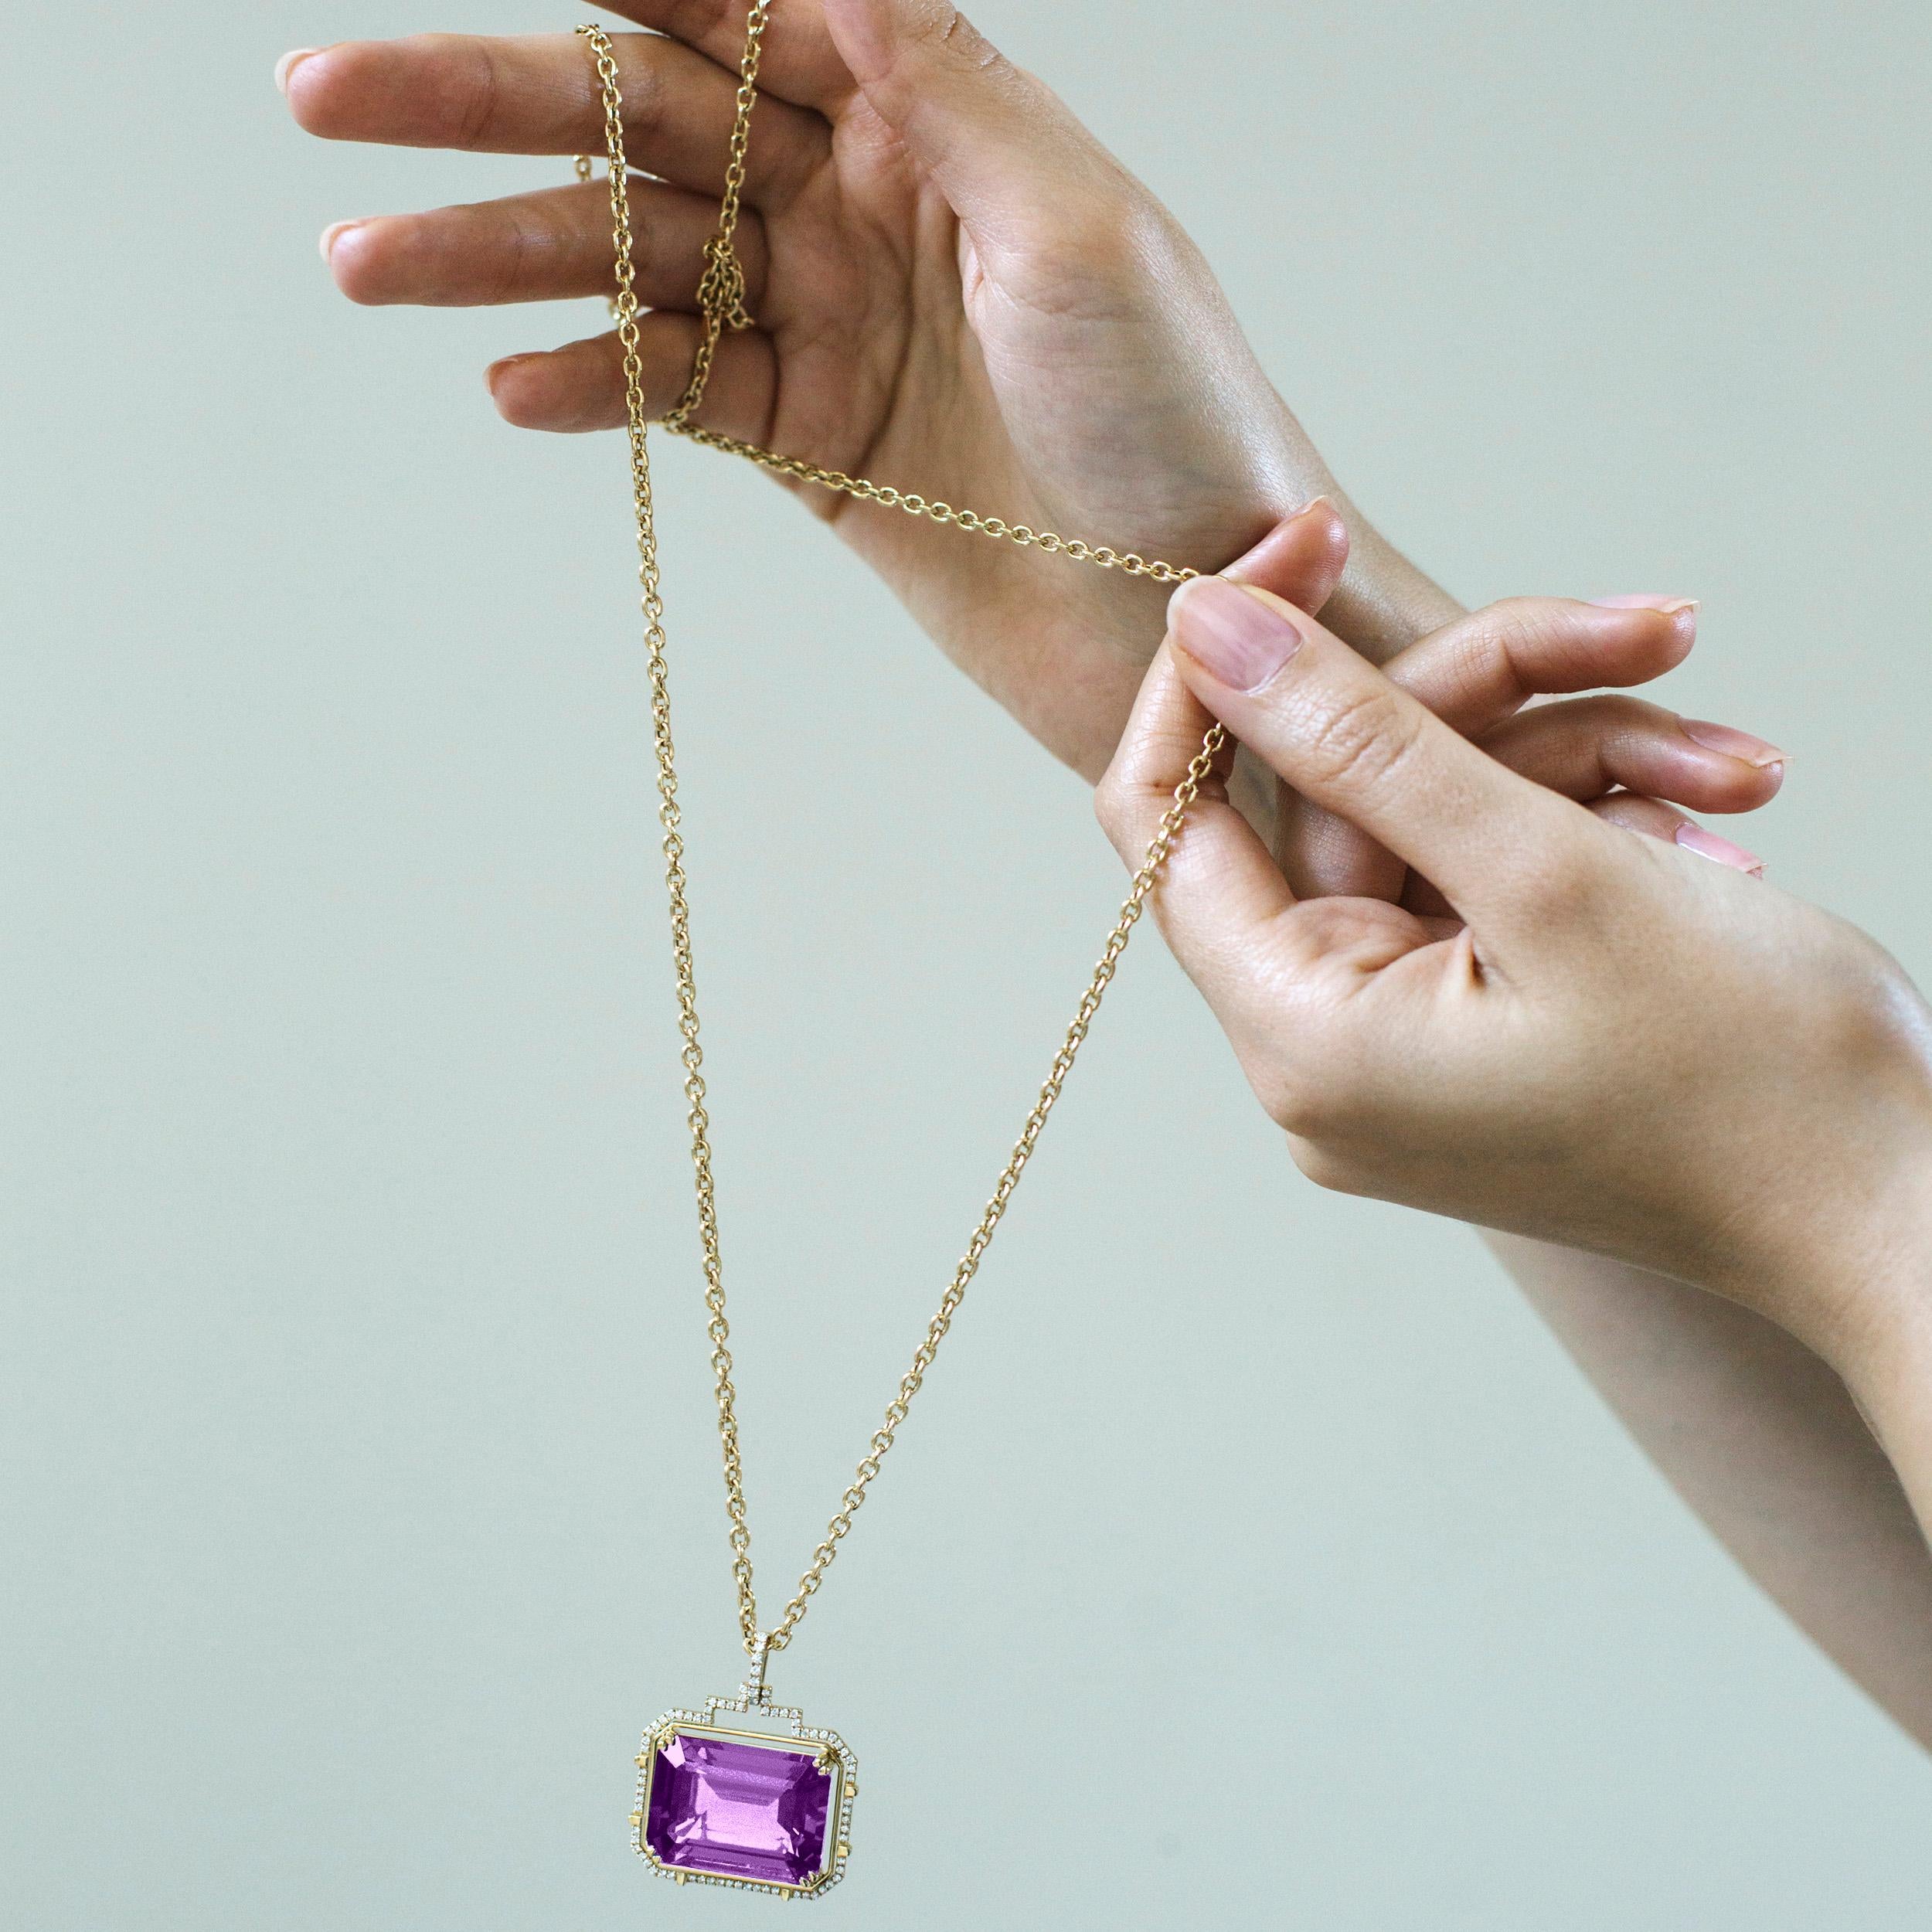 Amethyst Large Emerald Cut Pendant in 18K Yellow Gold with Diamonds from 'Gossip' Collection

Stone Size: 24 x 18 mm 

Gemstone Approx Wt: 37.49 Carats

Diamonds: G-H / VS, Approx Wt: 0.53 Carats

*Chain included.